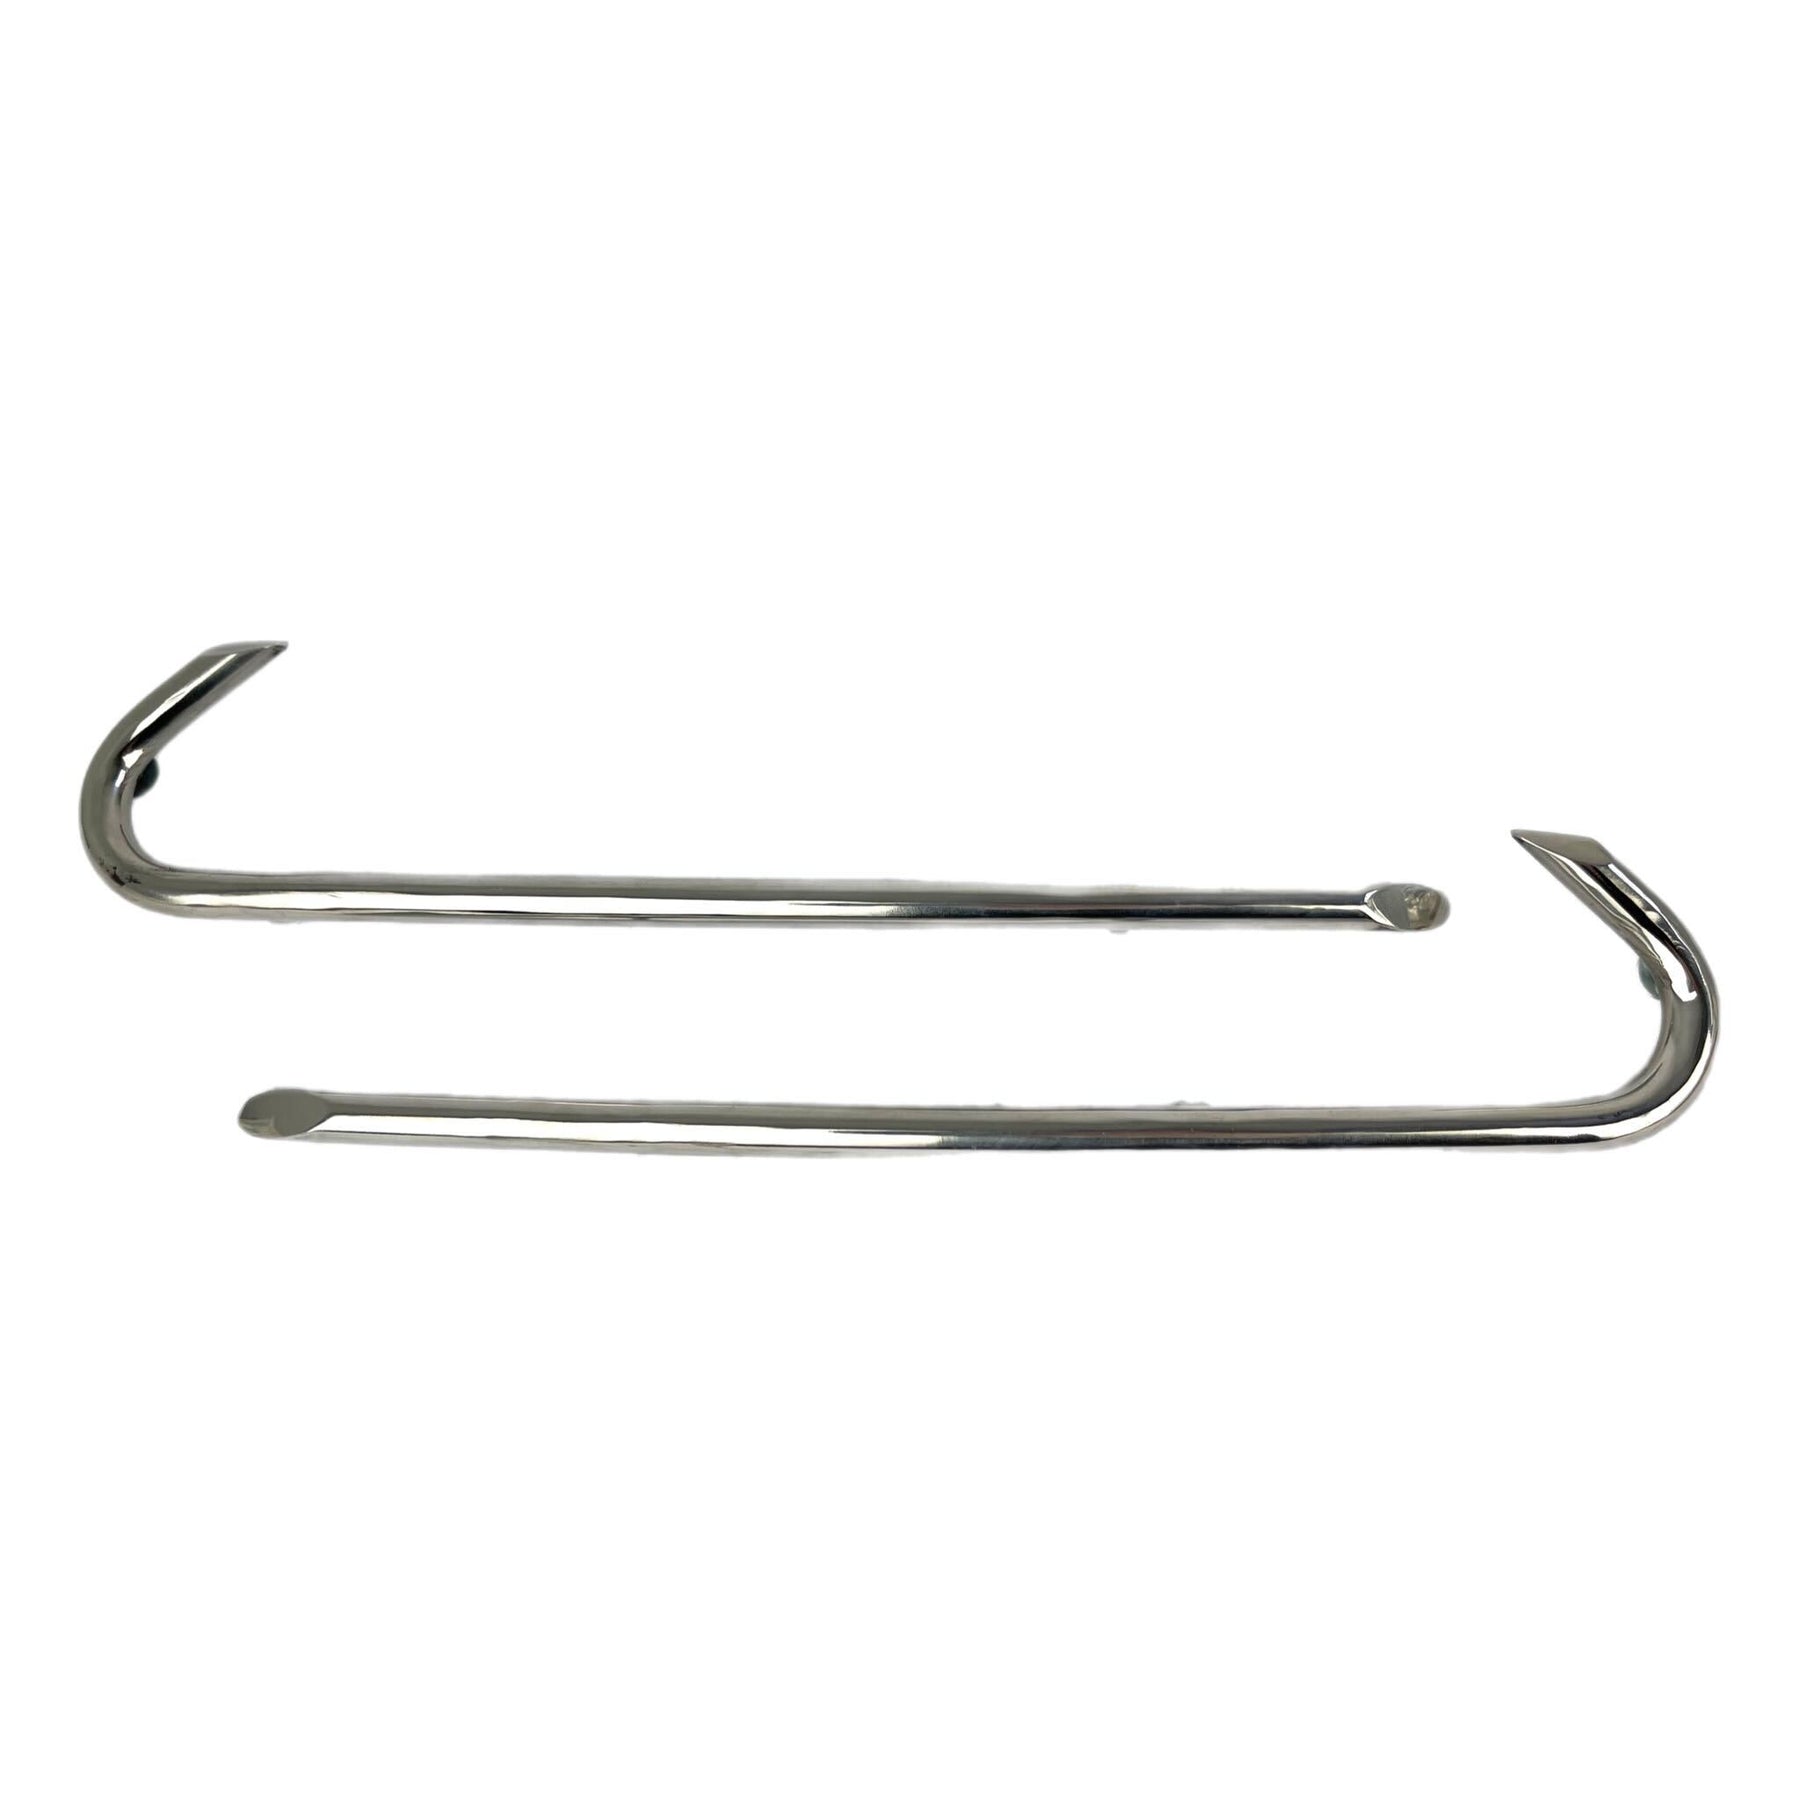 Vespa GS160 Front Mudguard Trim - Stainless Steel